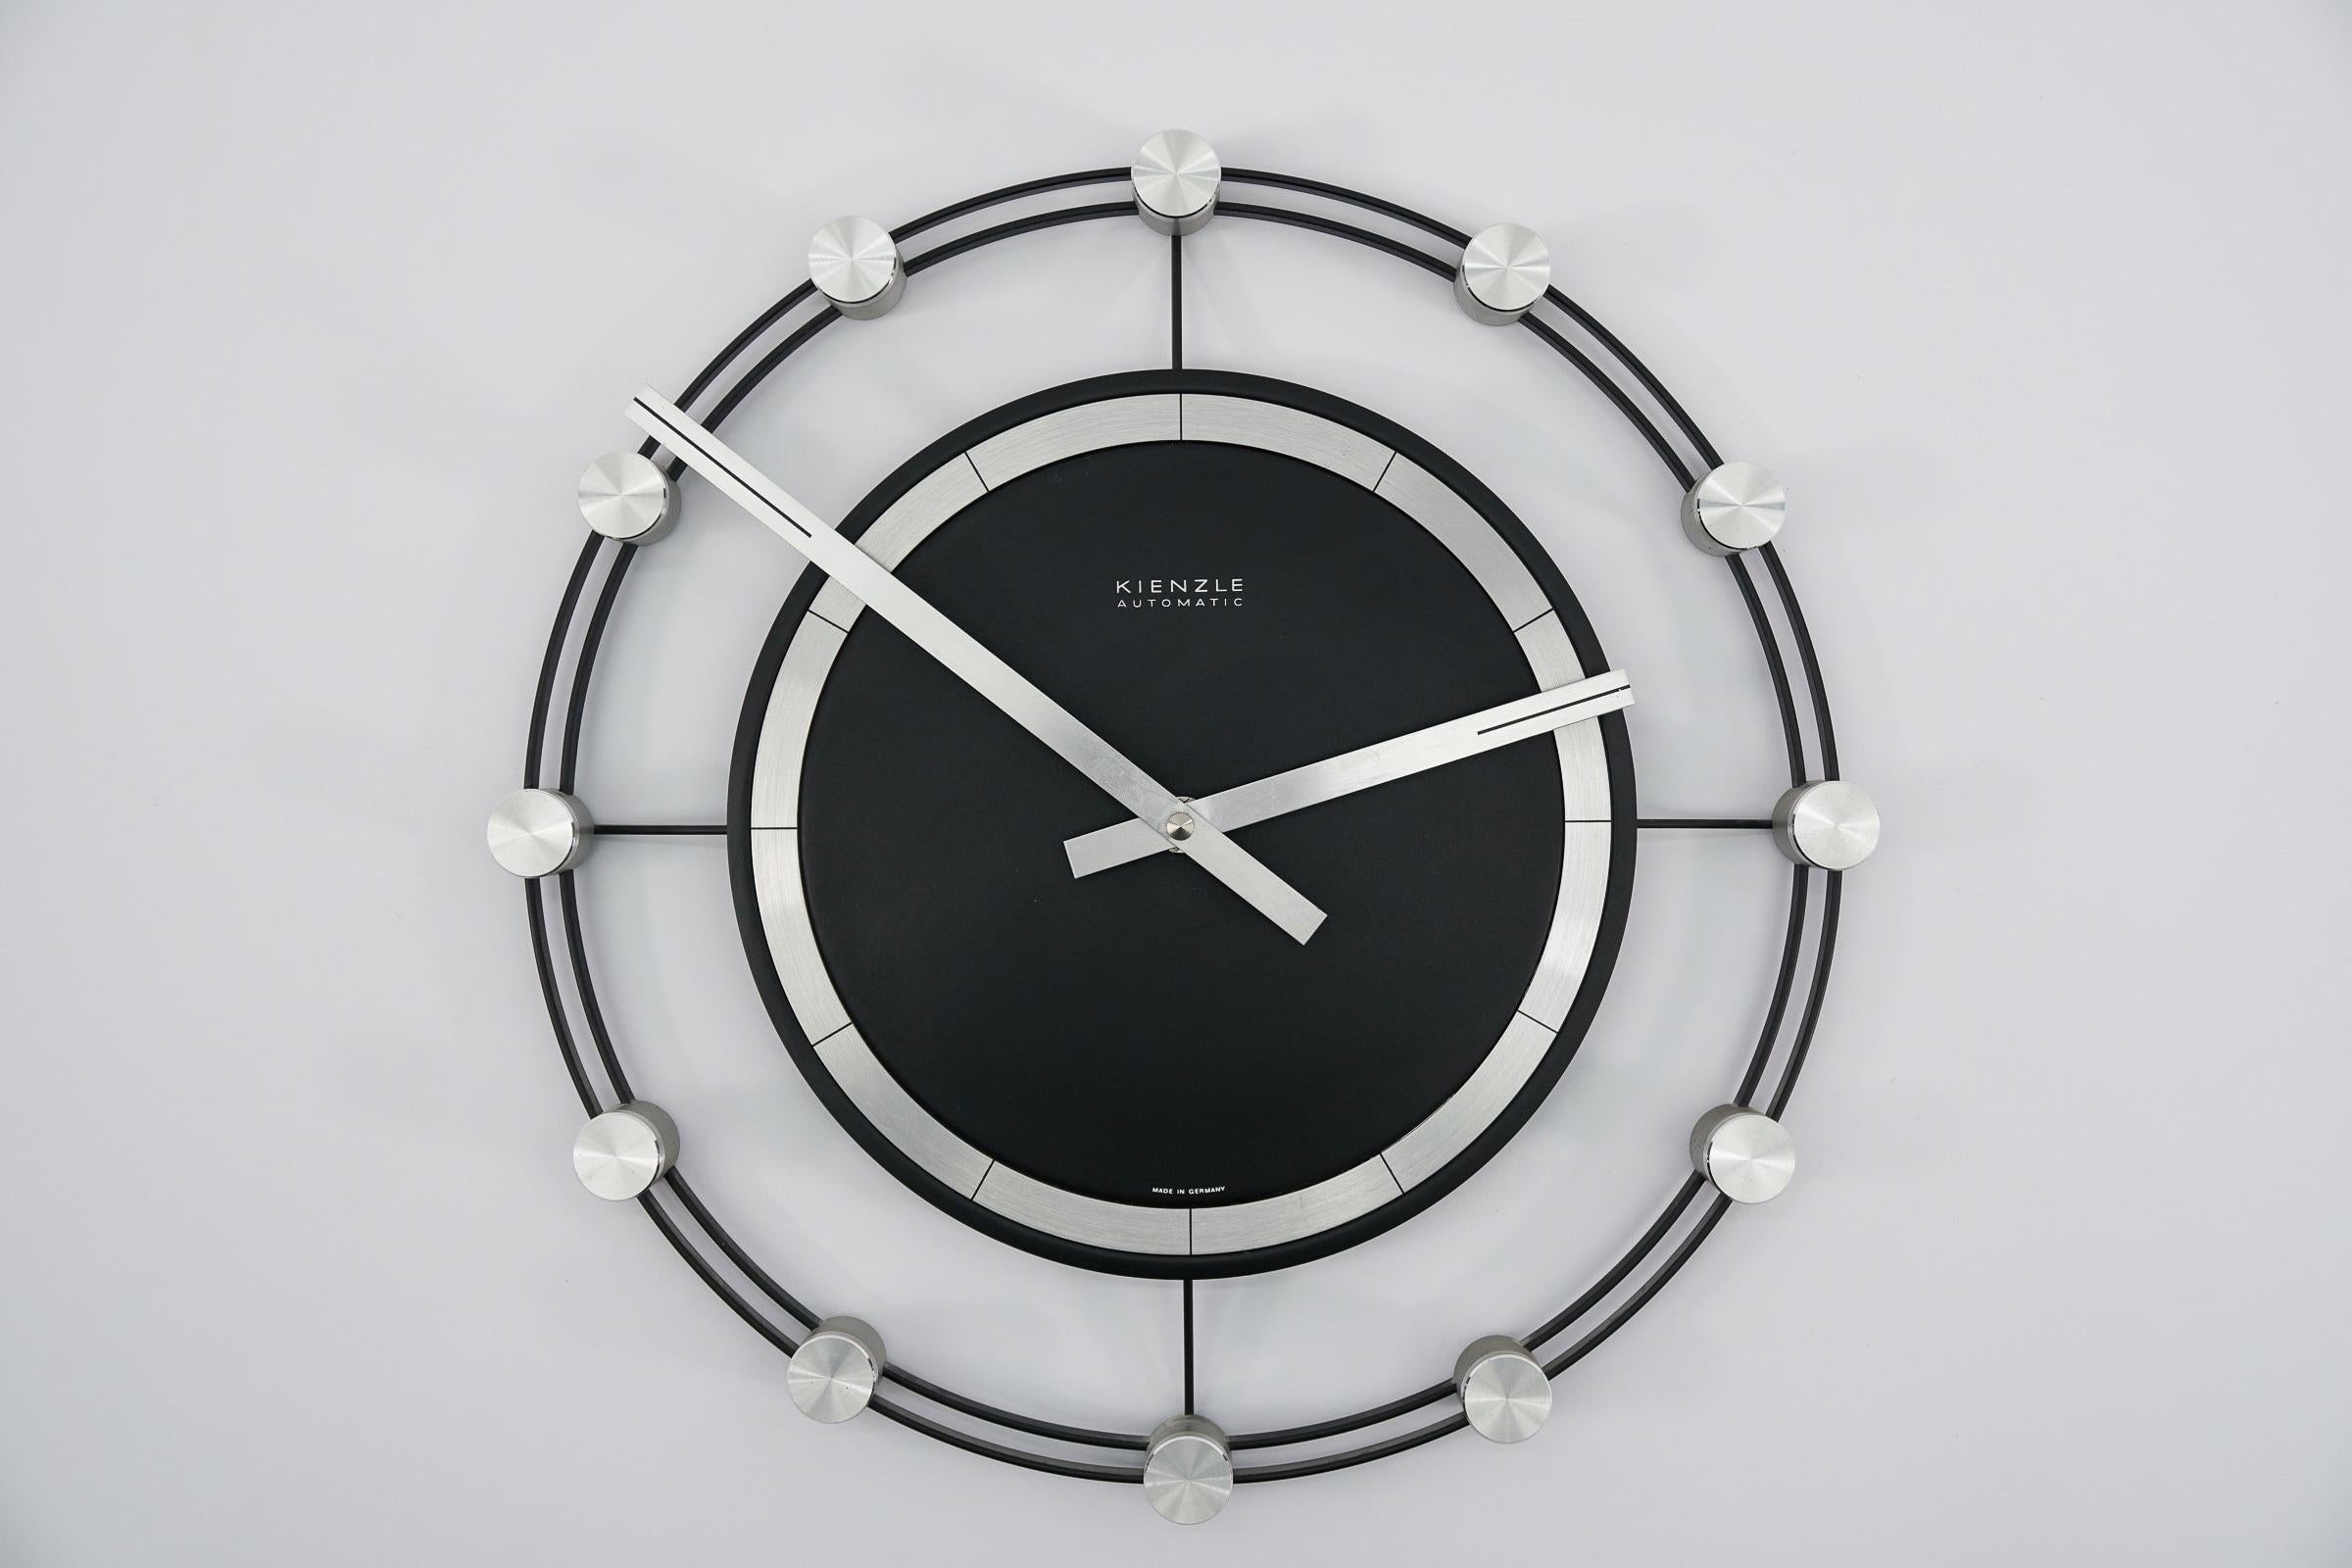 Mid-20th Century Space Age Sunburst Wall Clock by Kienzle Automatic in Aluminium, 1960s Germany For Sale